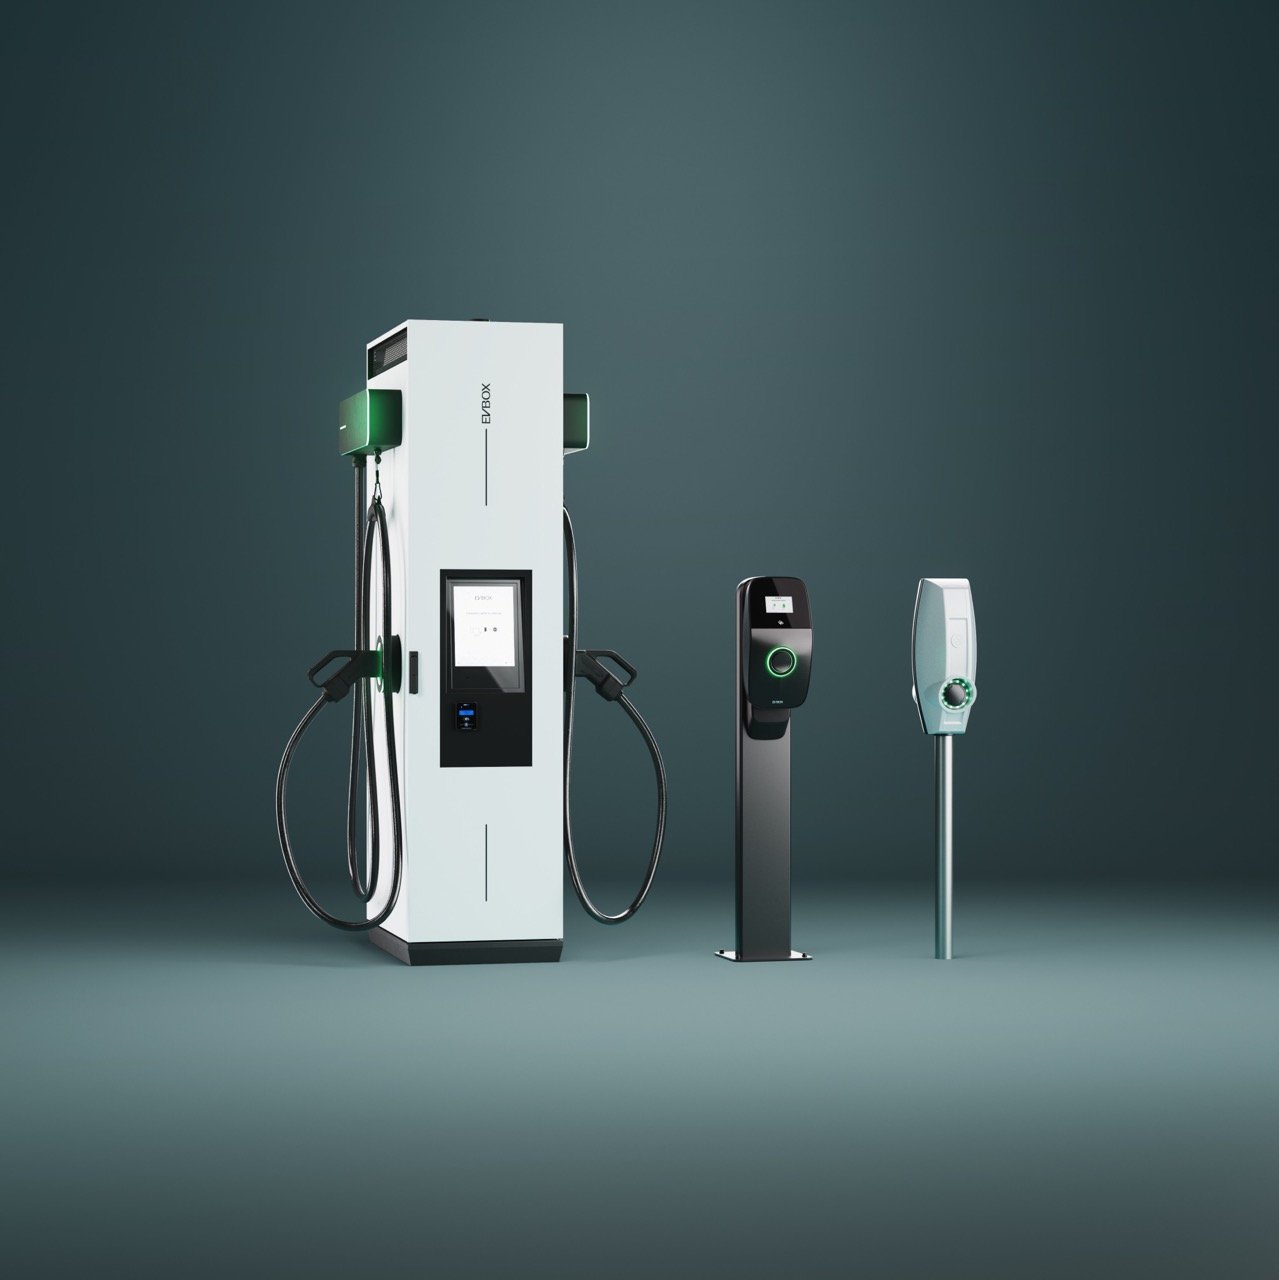 An overview of different type of charging stations, from left to right: EVBox Troniq Modular (level 3), EVBox Livo (Level 2), EVBox BusinessLine (Level 2).